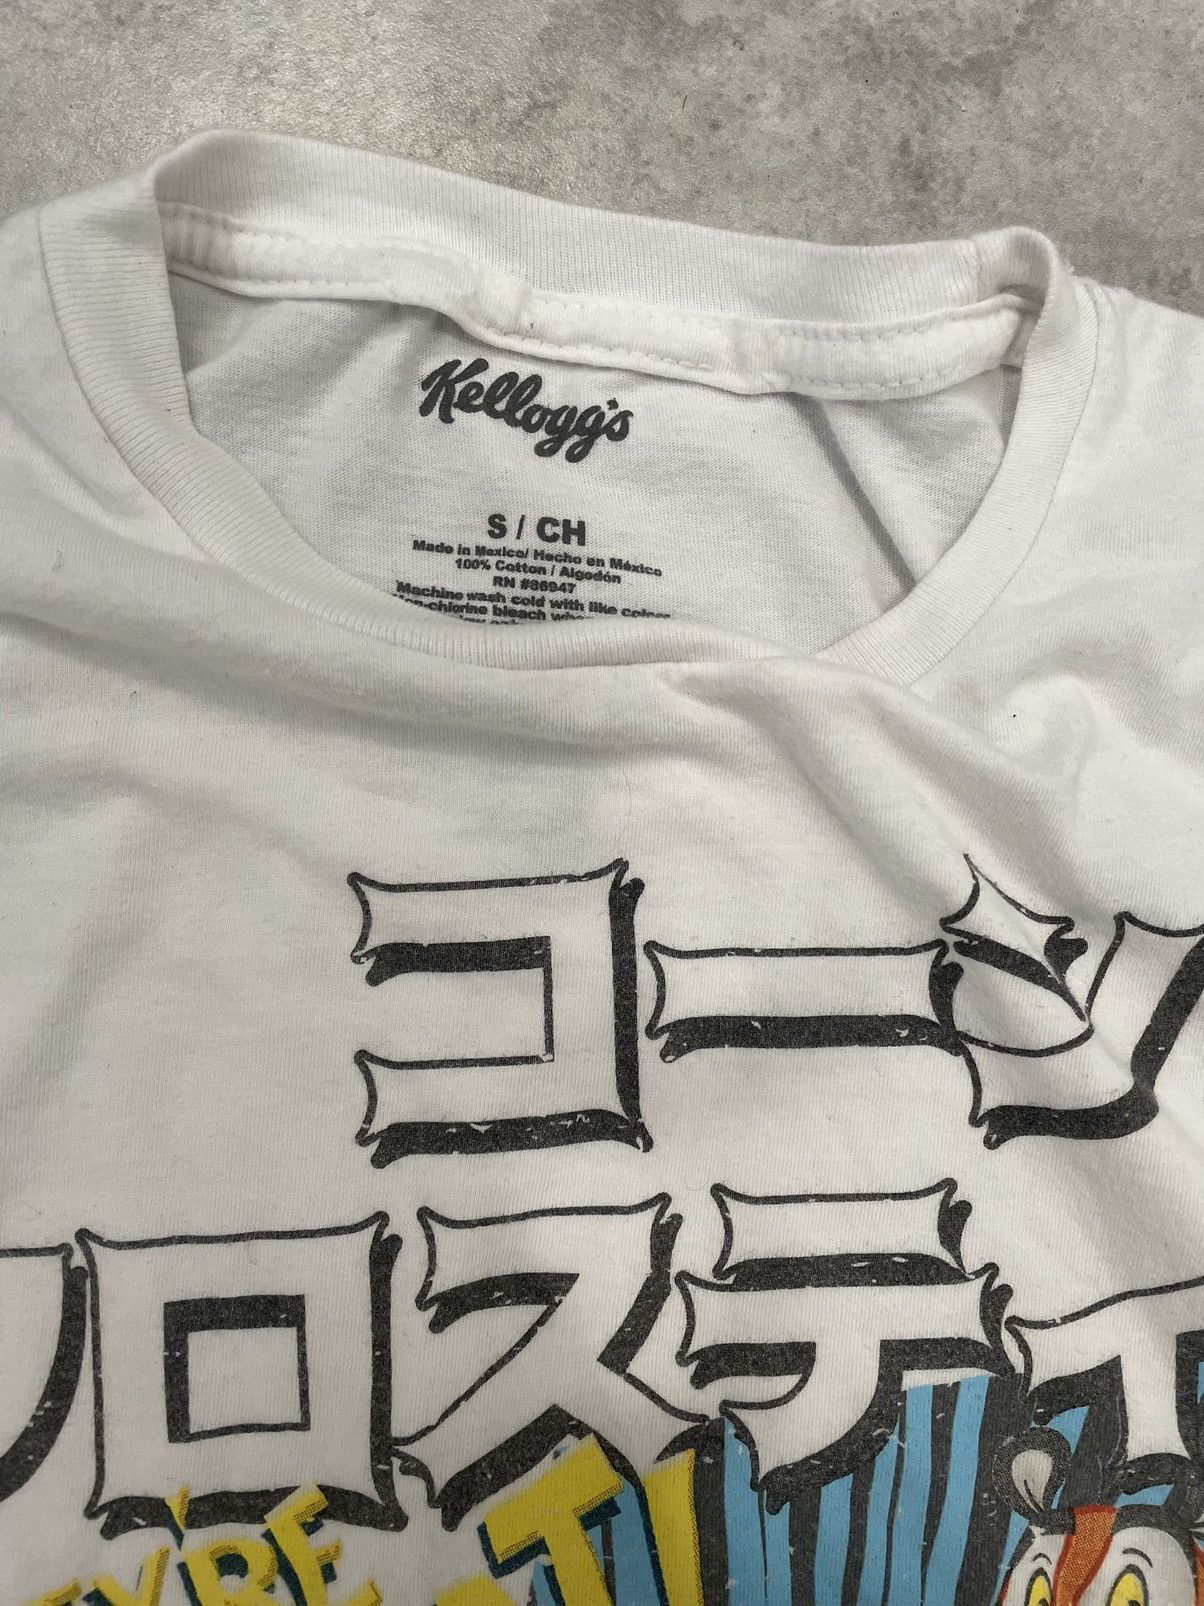 Vintage Kellogg’s “Japanese Frosted Flakes” Tee Size US S / EU 44-46 / 1 - 3 Preview